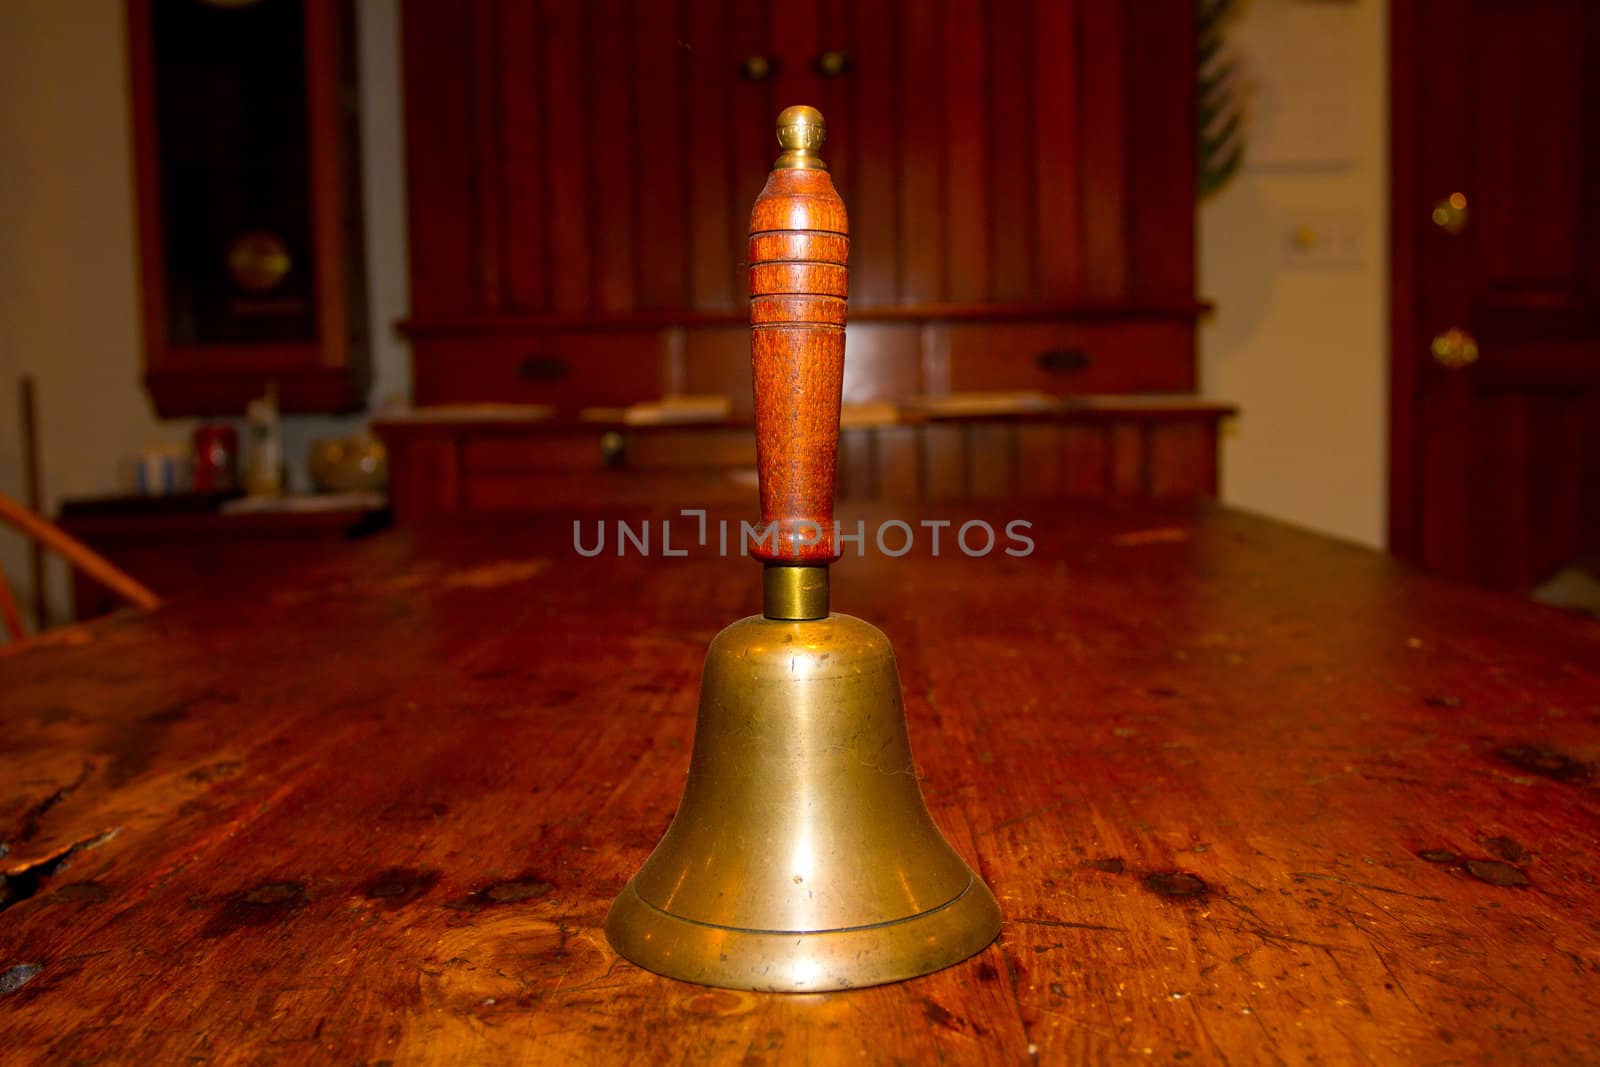 An old bell for ringing photographed on a vintage antique wooden table.